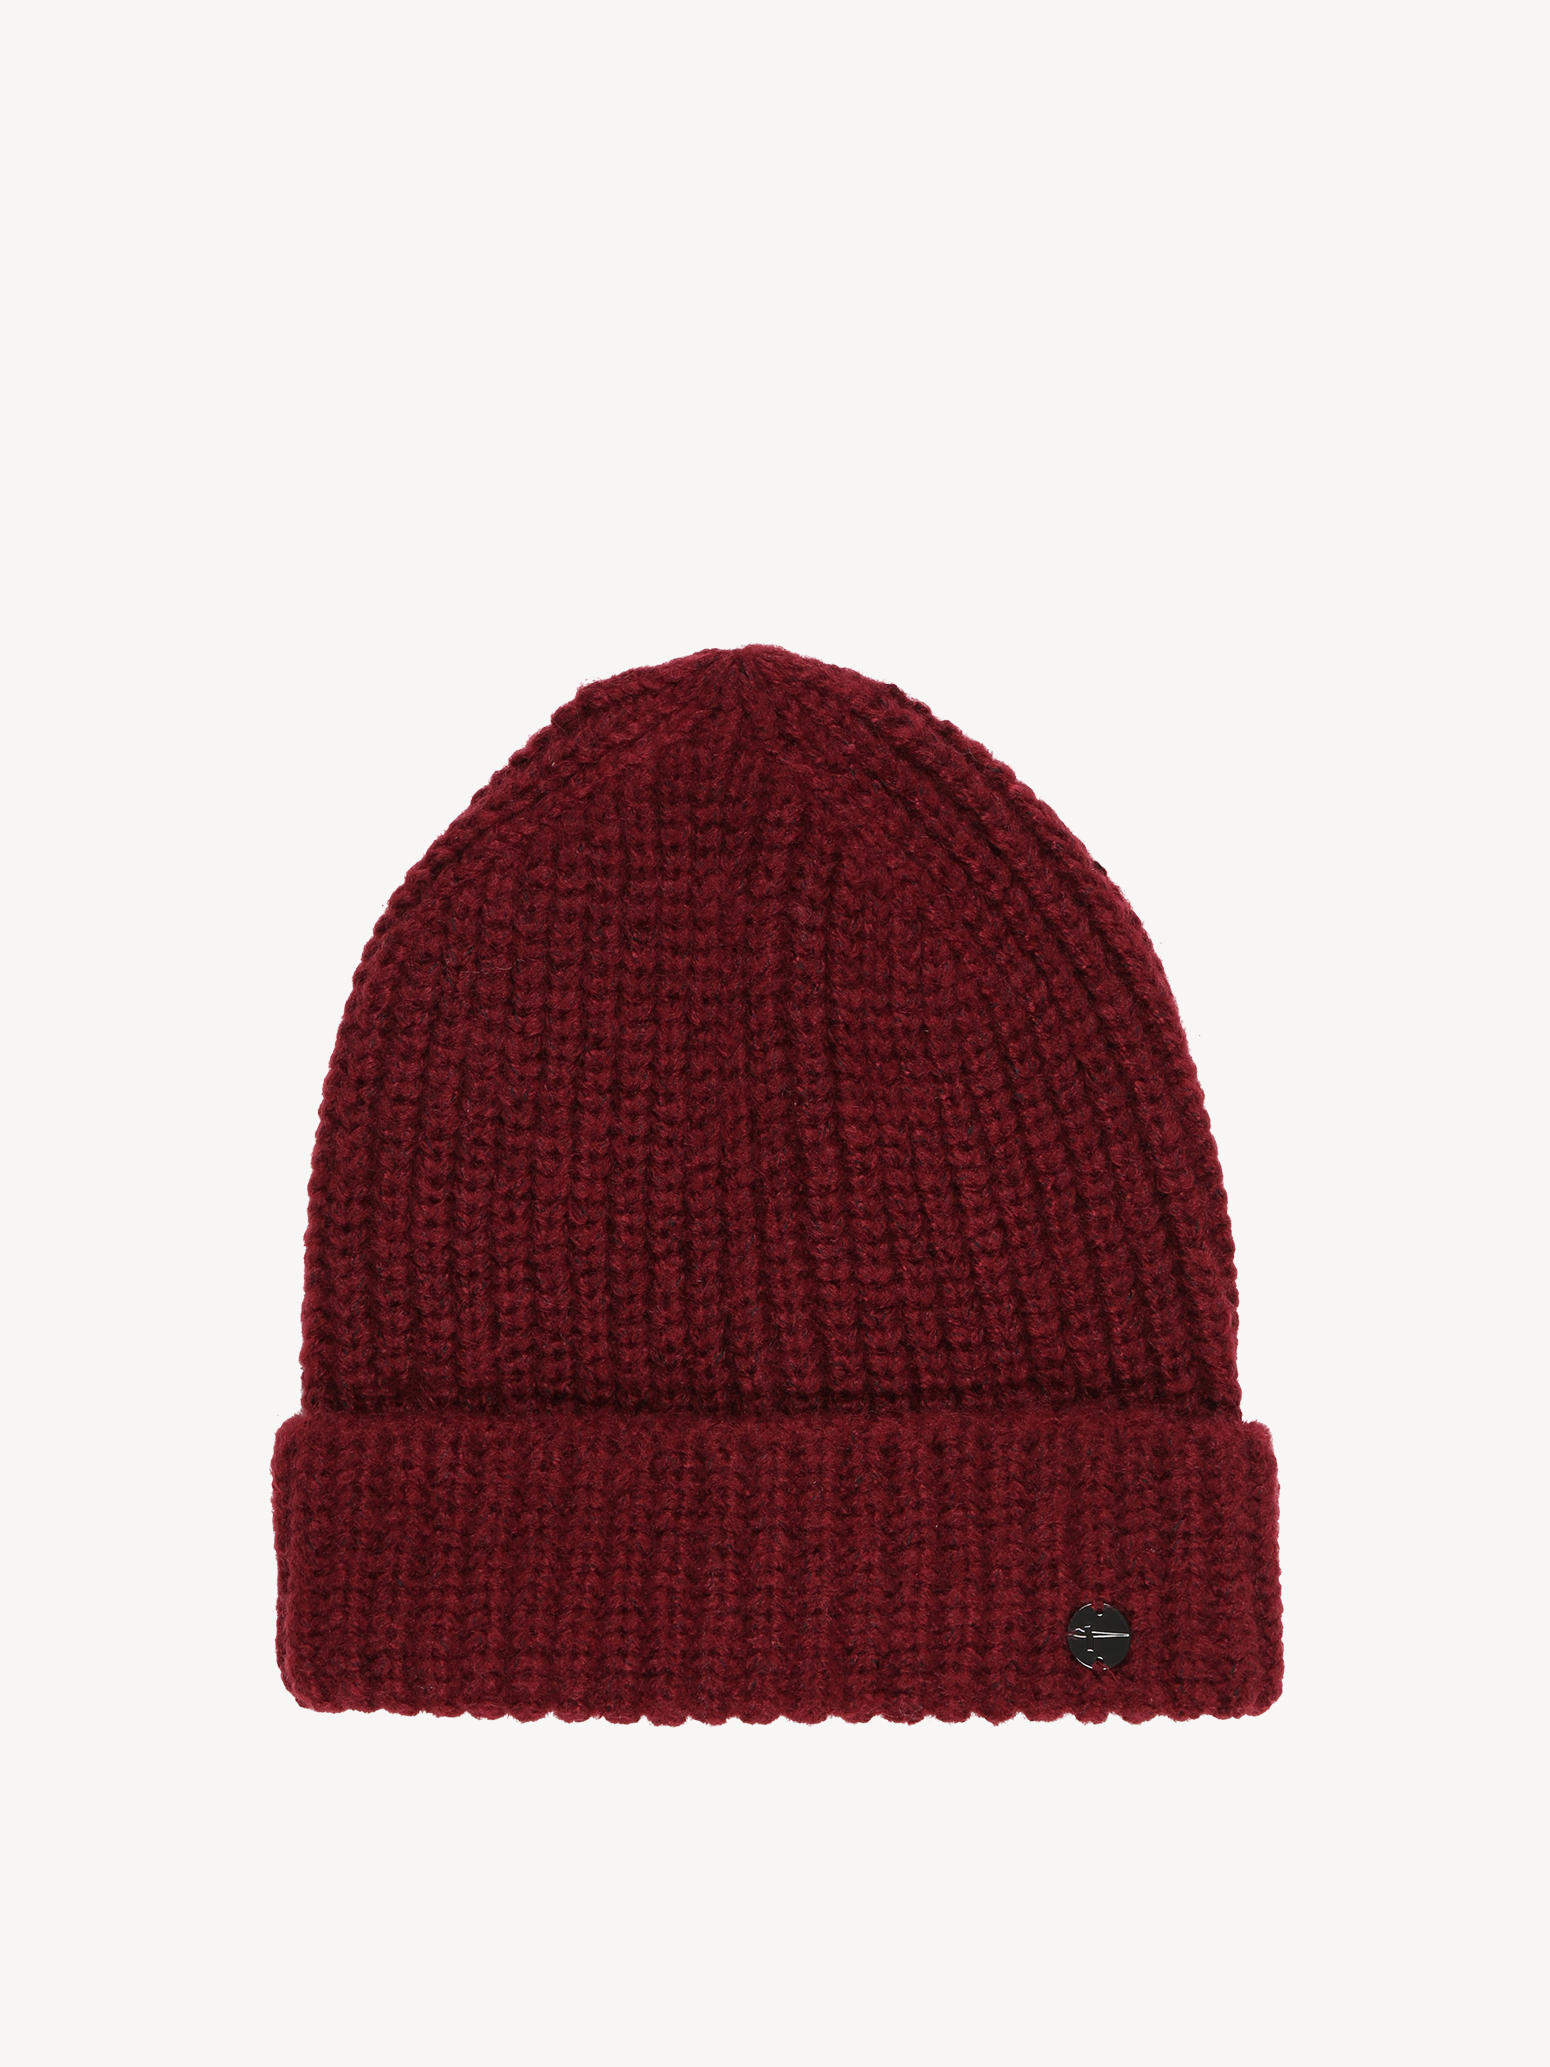 Hat - red